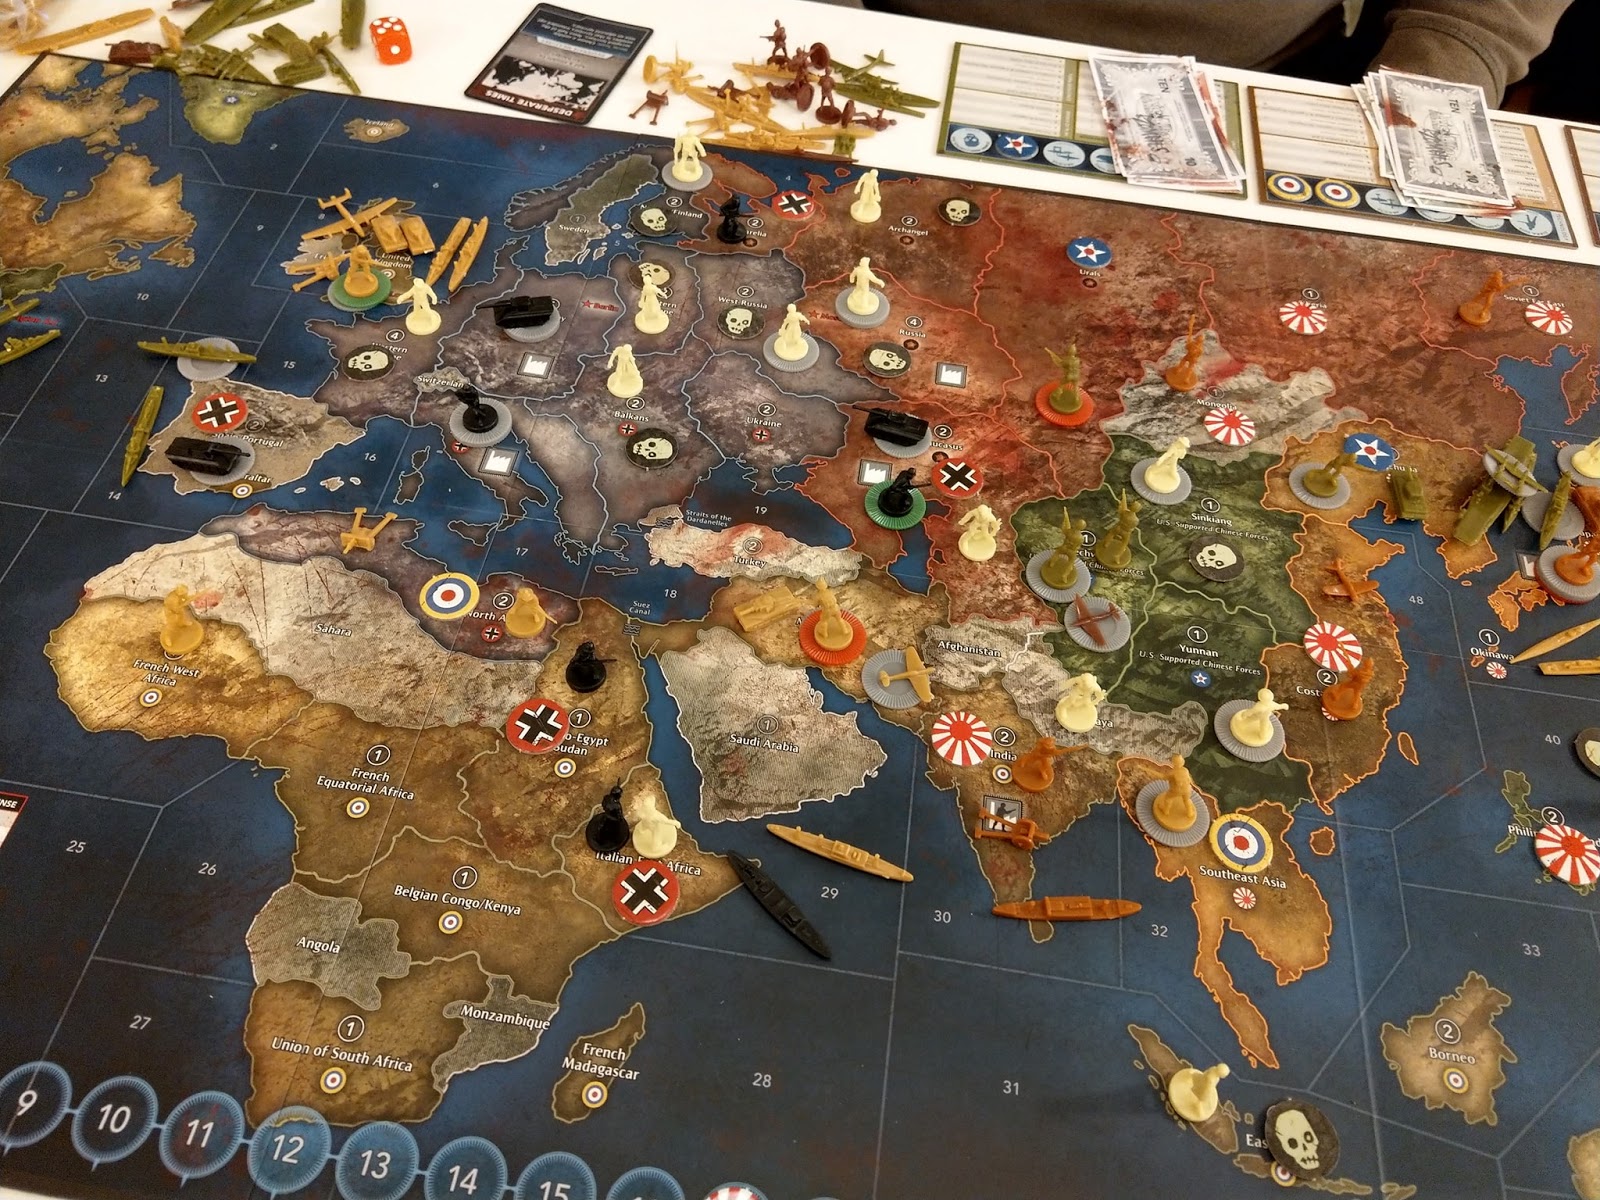 The Wertzone Axis Allies Zombies